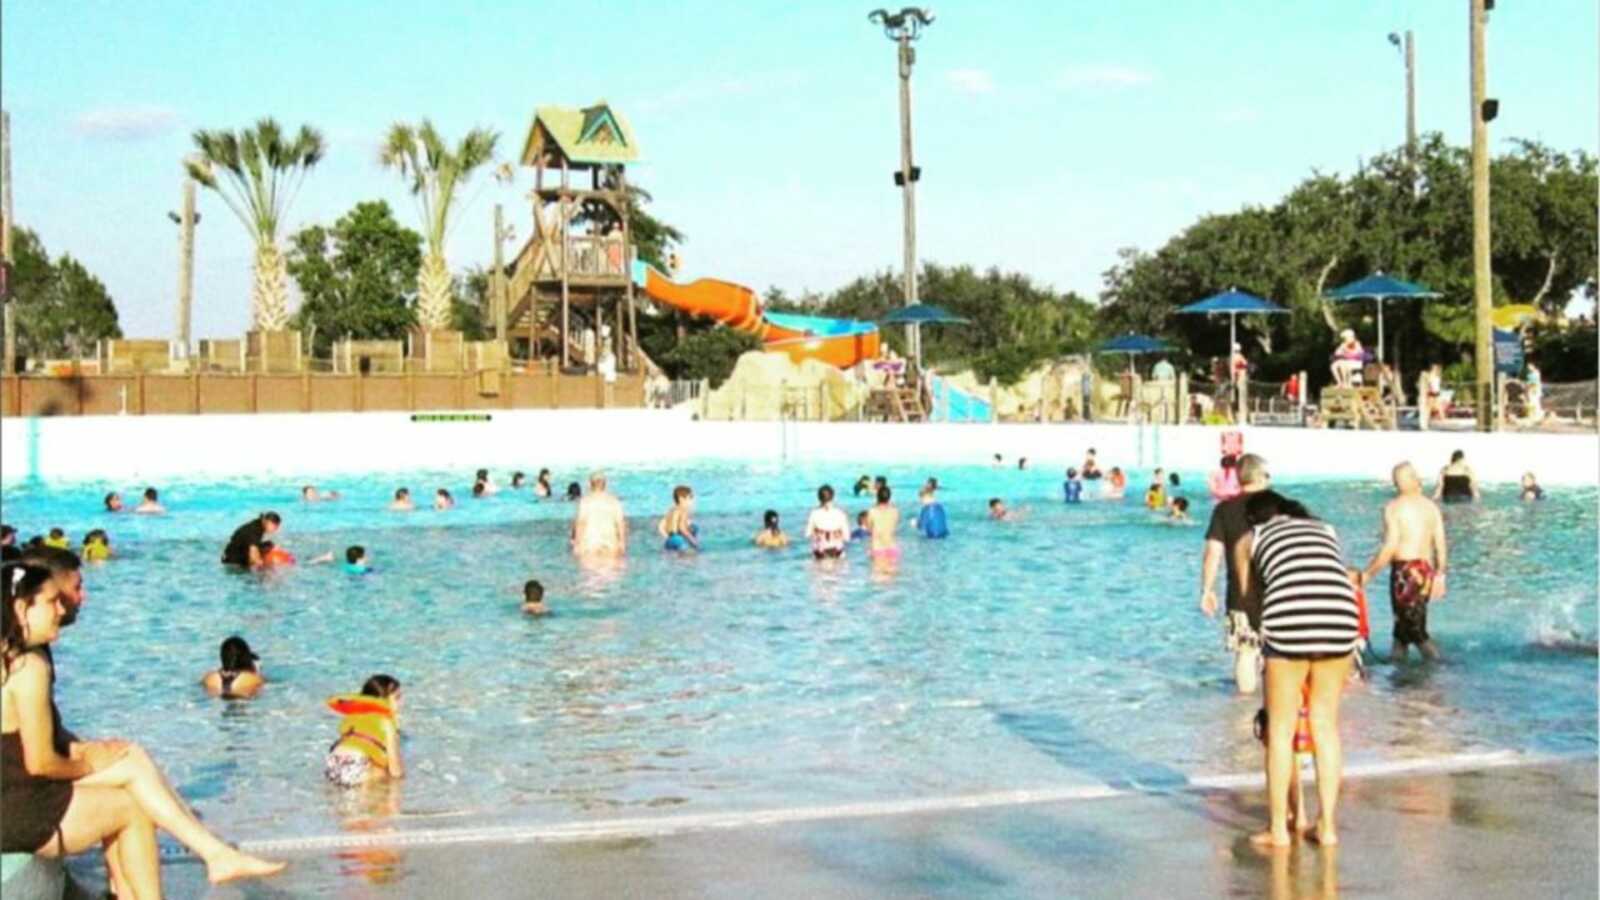 People at the water park scattered throughout pool